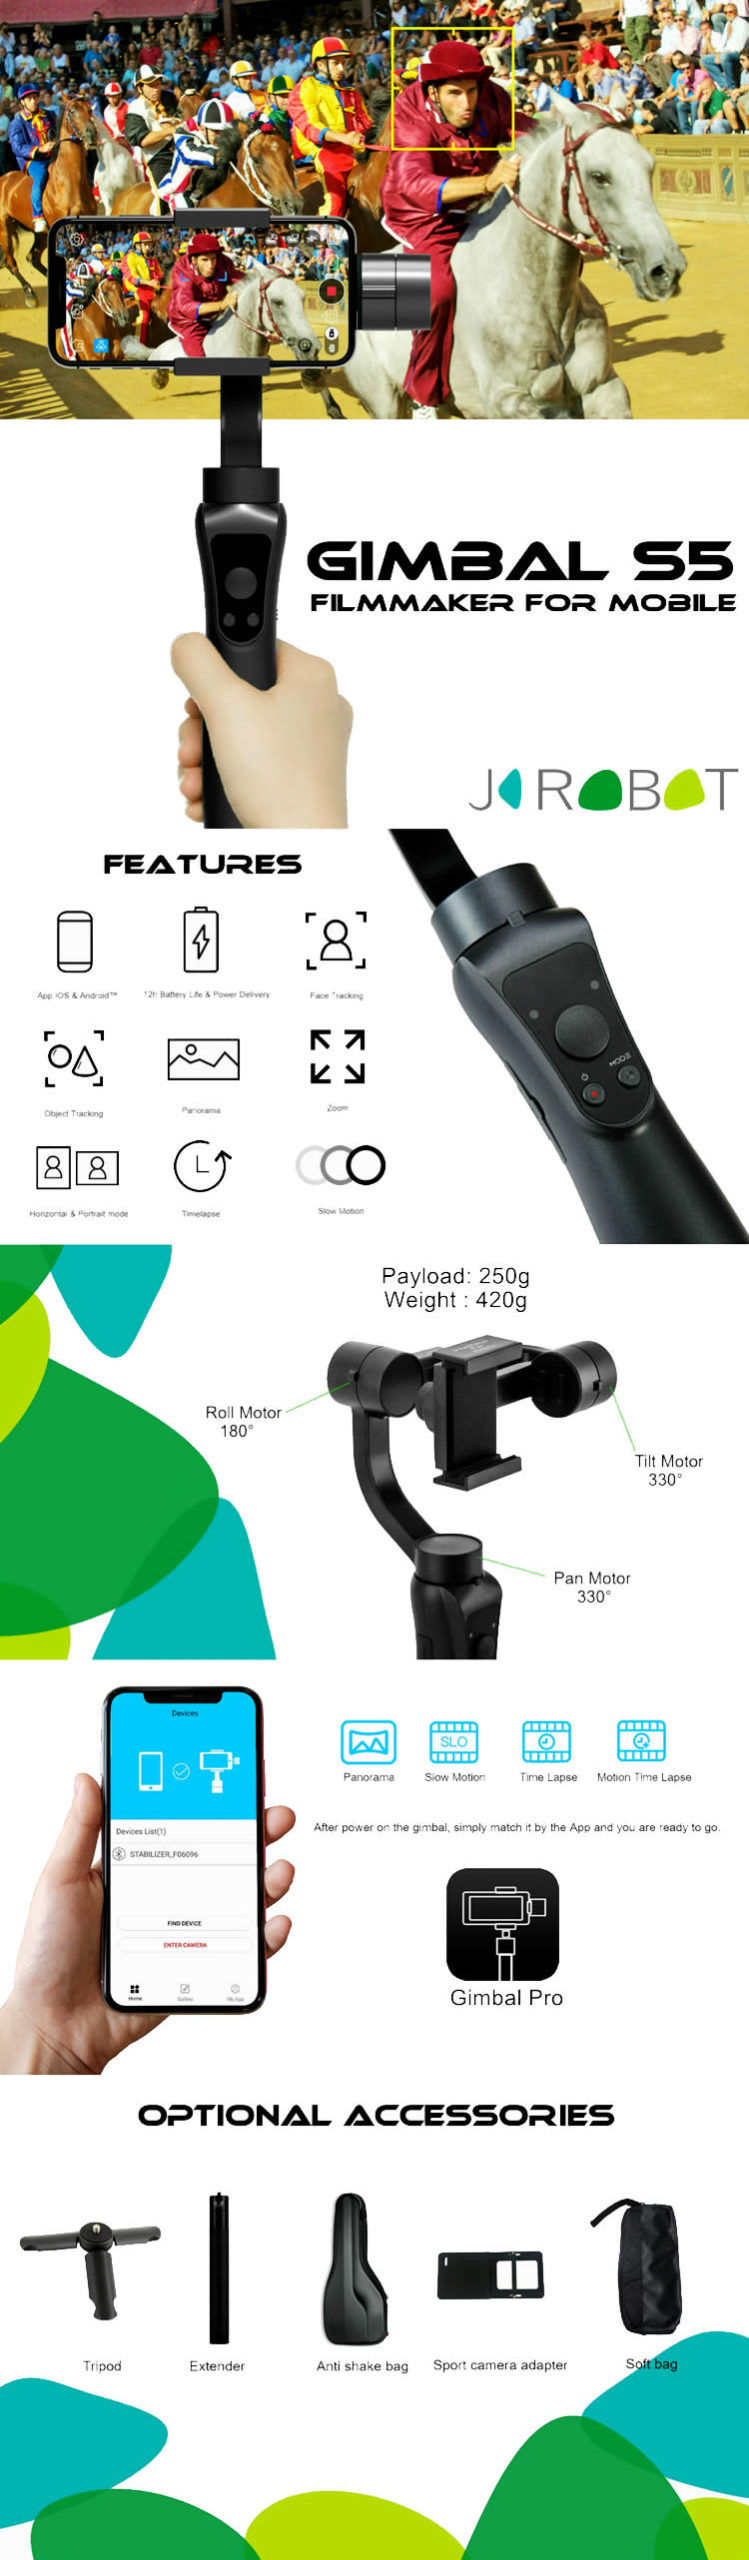 3 axis handheld gimbal stabilizer